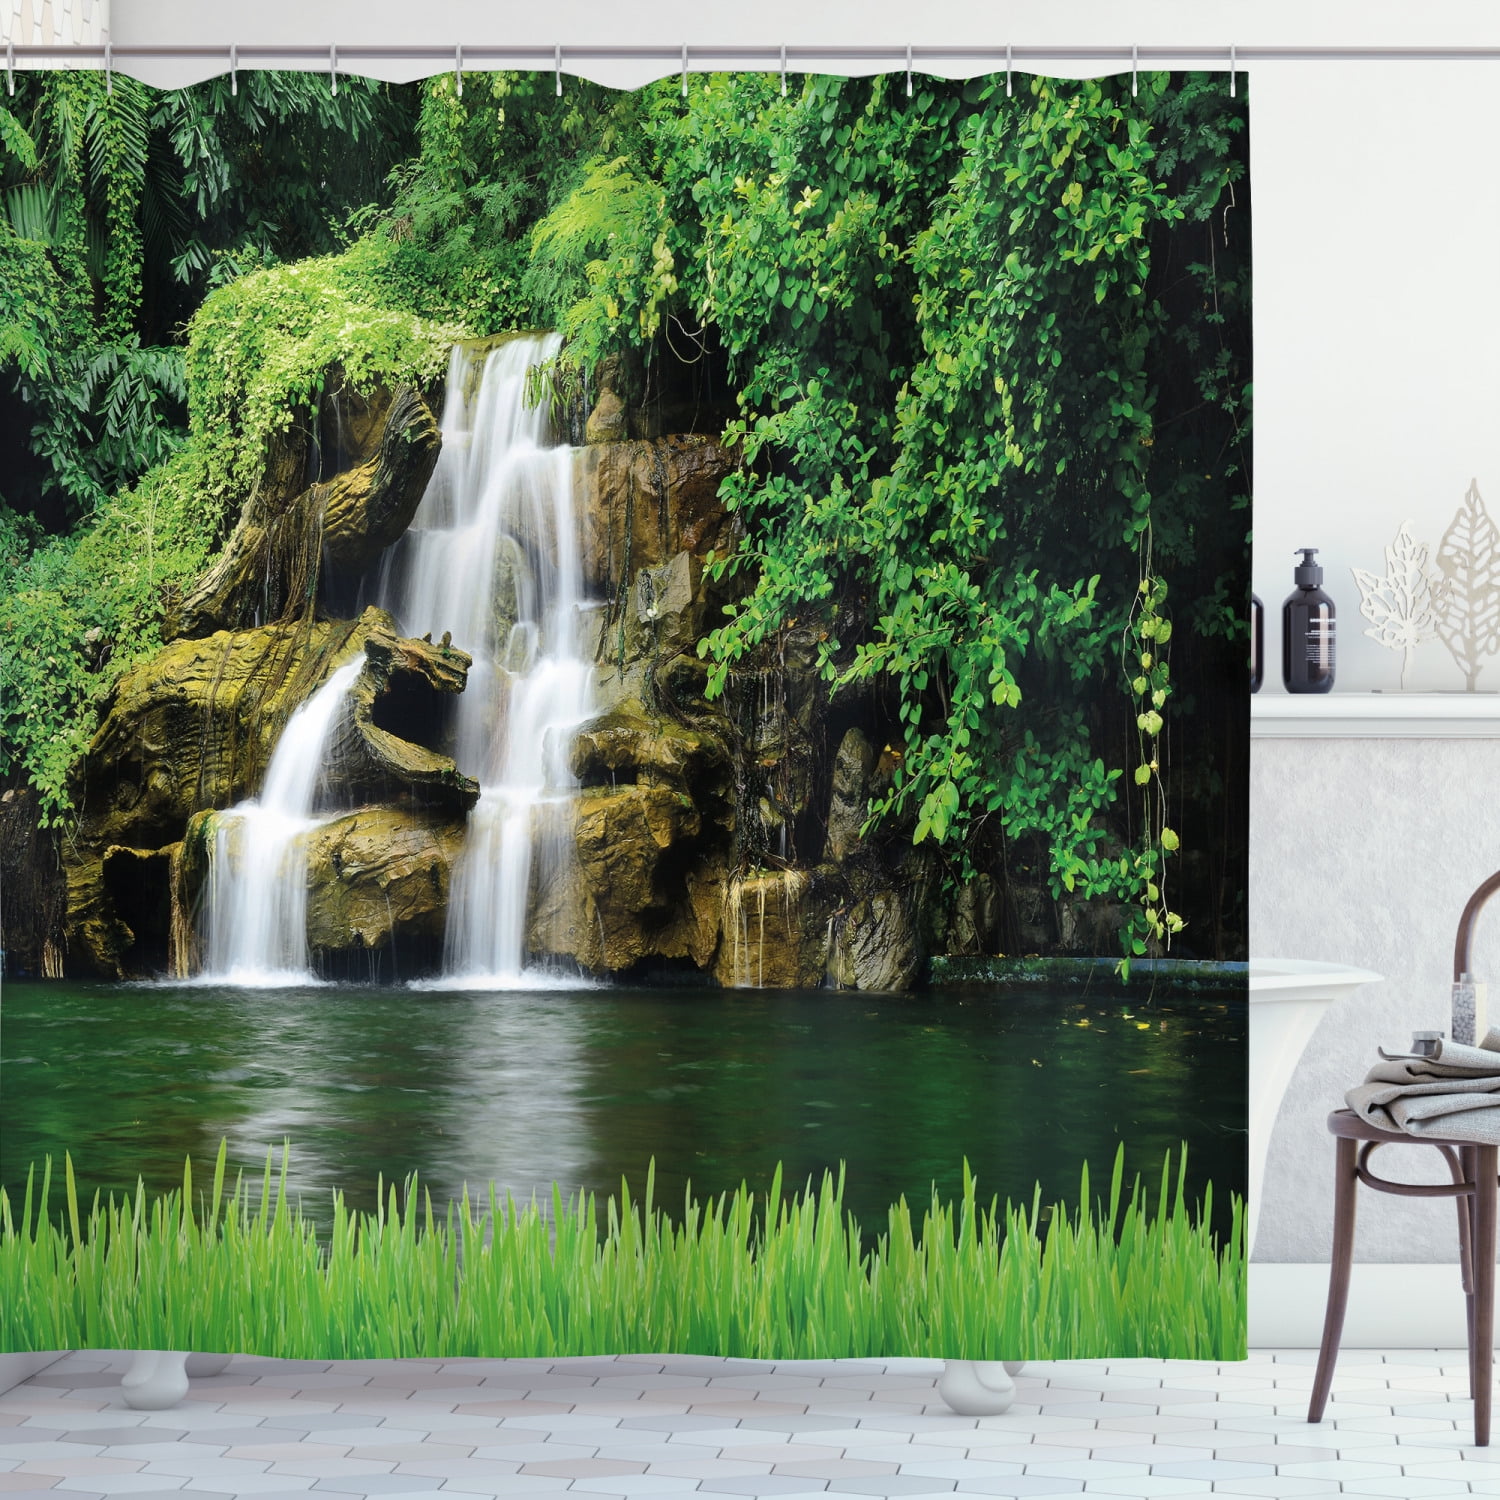 Forest Waterfall Scene Shower Curtain Set 100% Polyester Fabric Bathroom & Hooks 